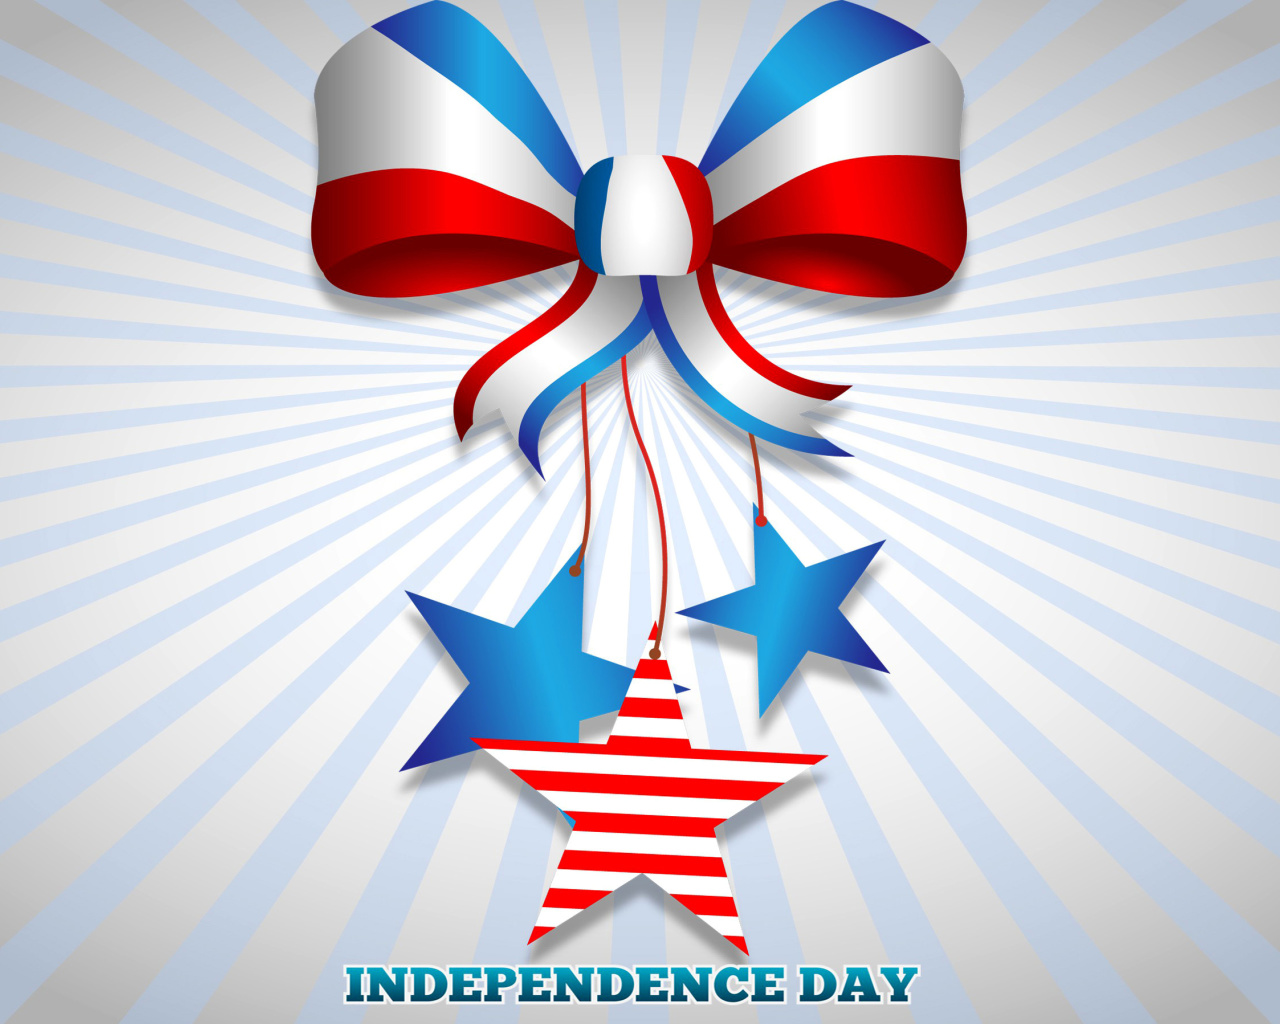 United states america Idependence day 4th july wallpaper 1280x1024